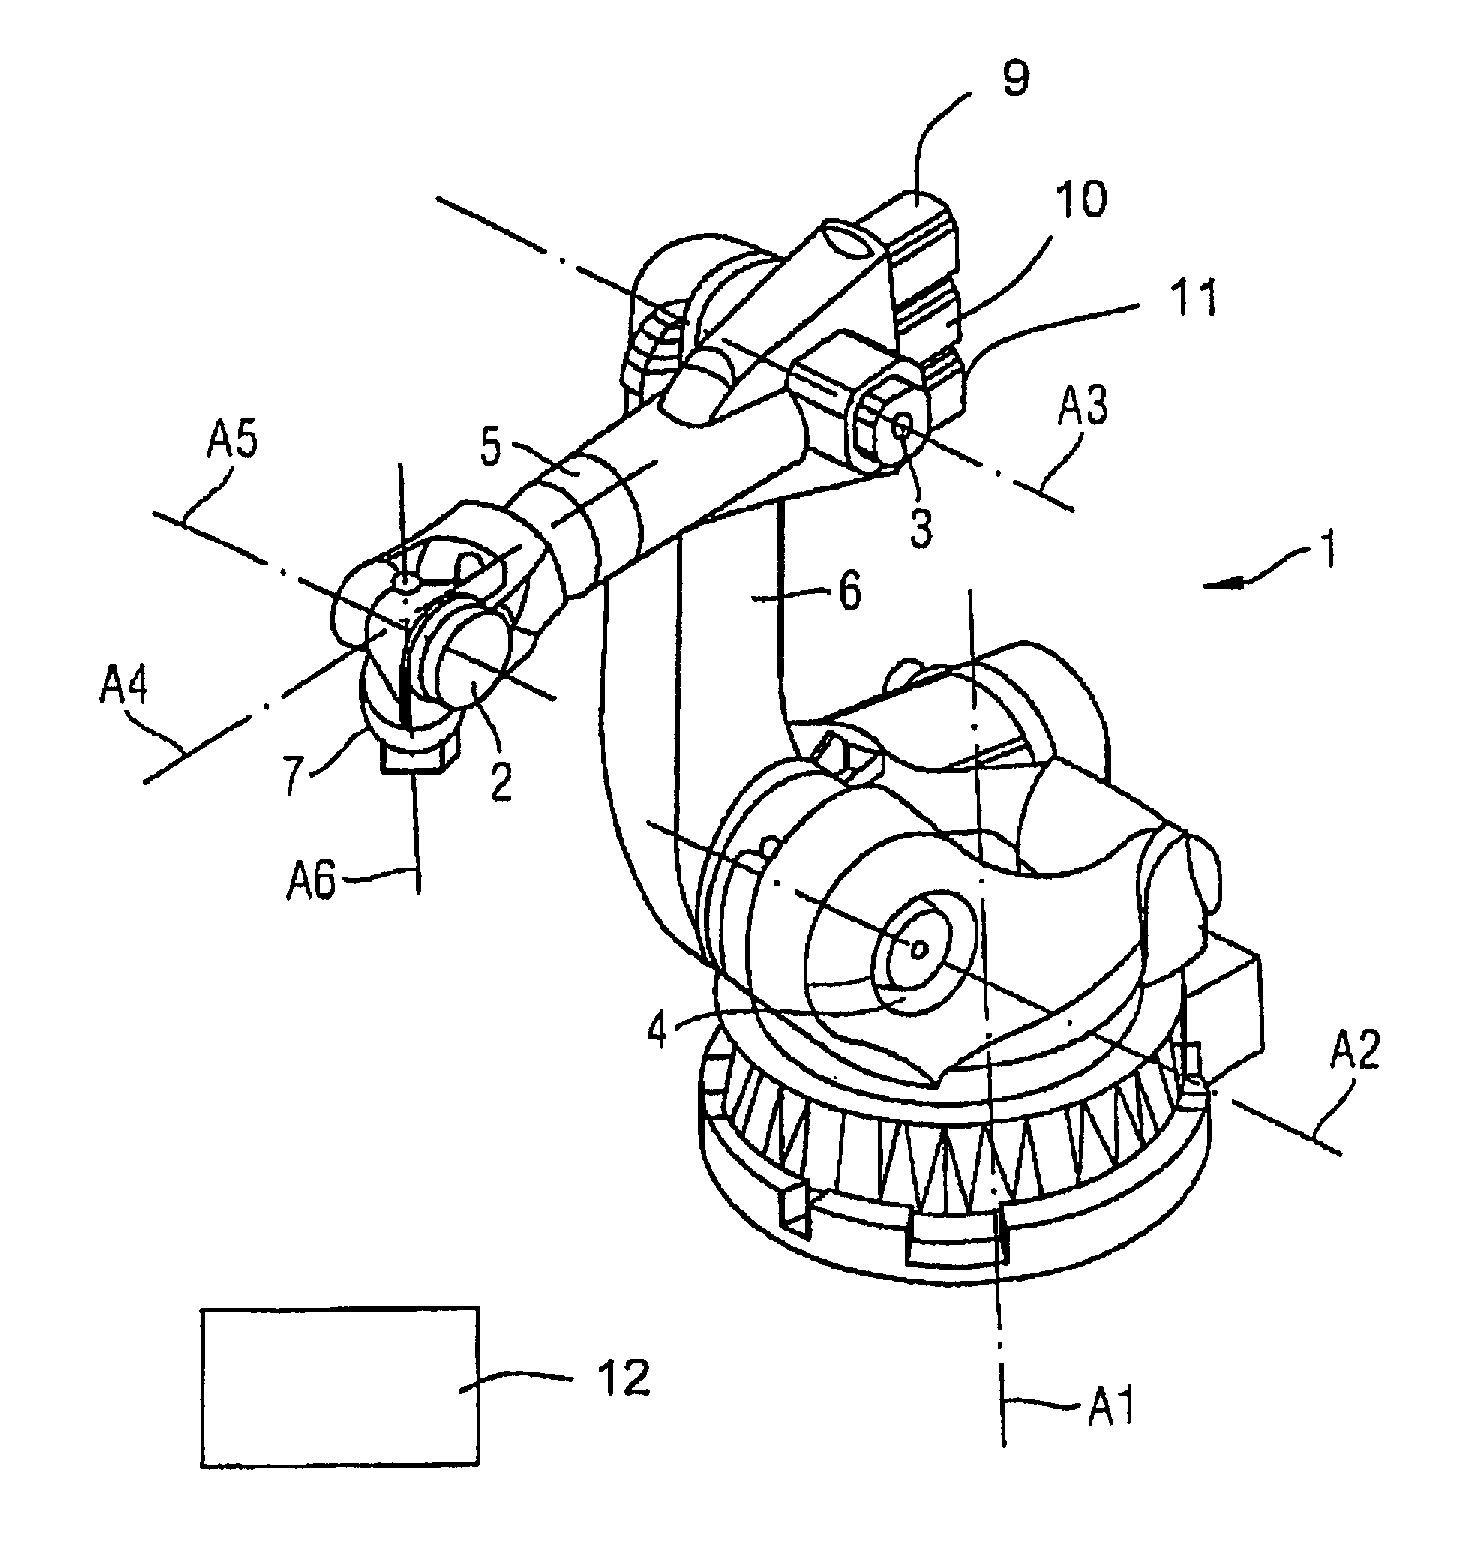 Method to test a brake of a robot